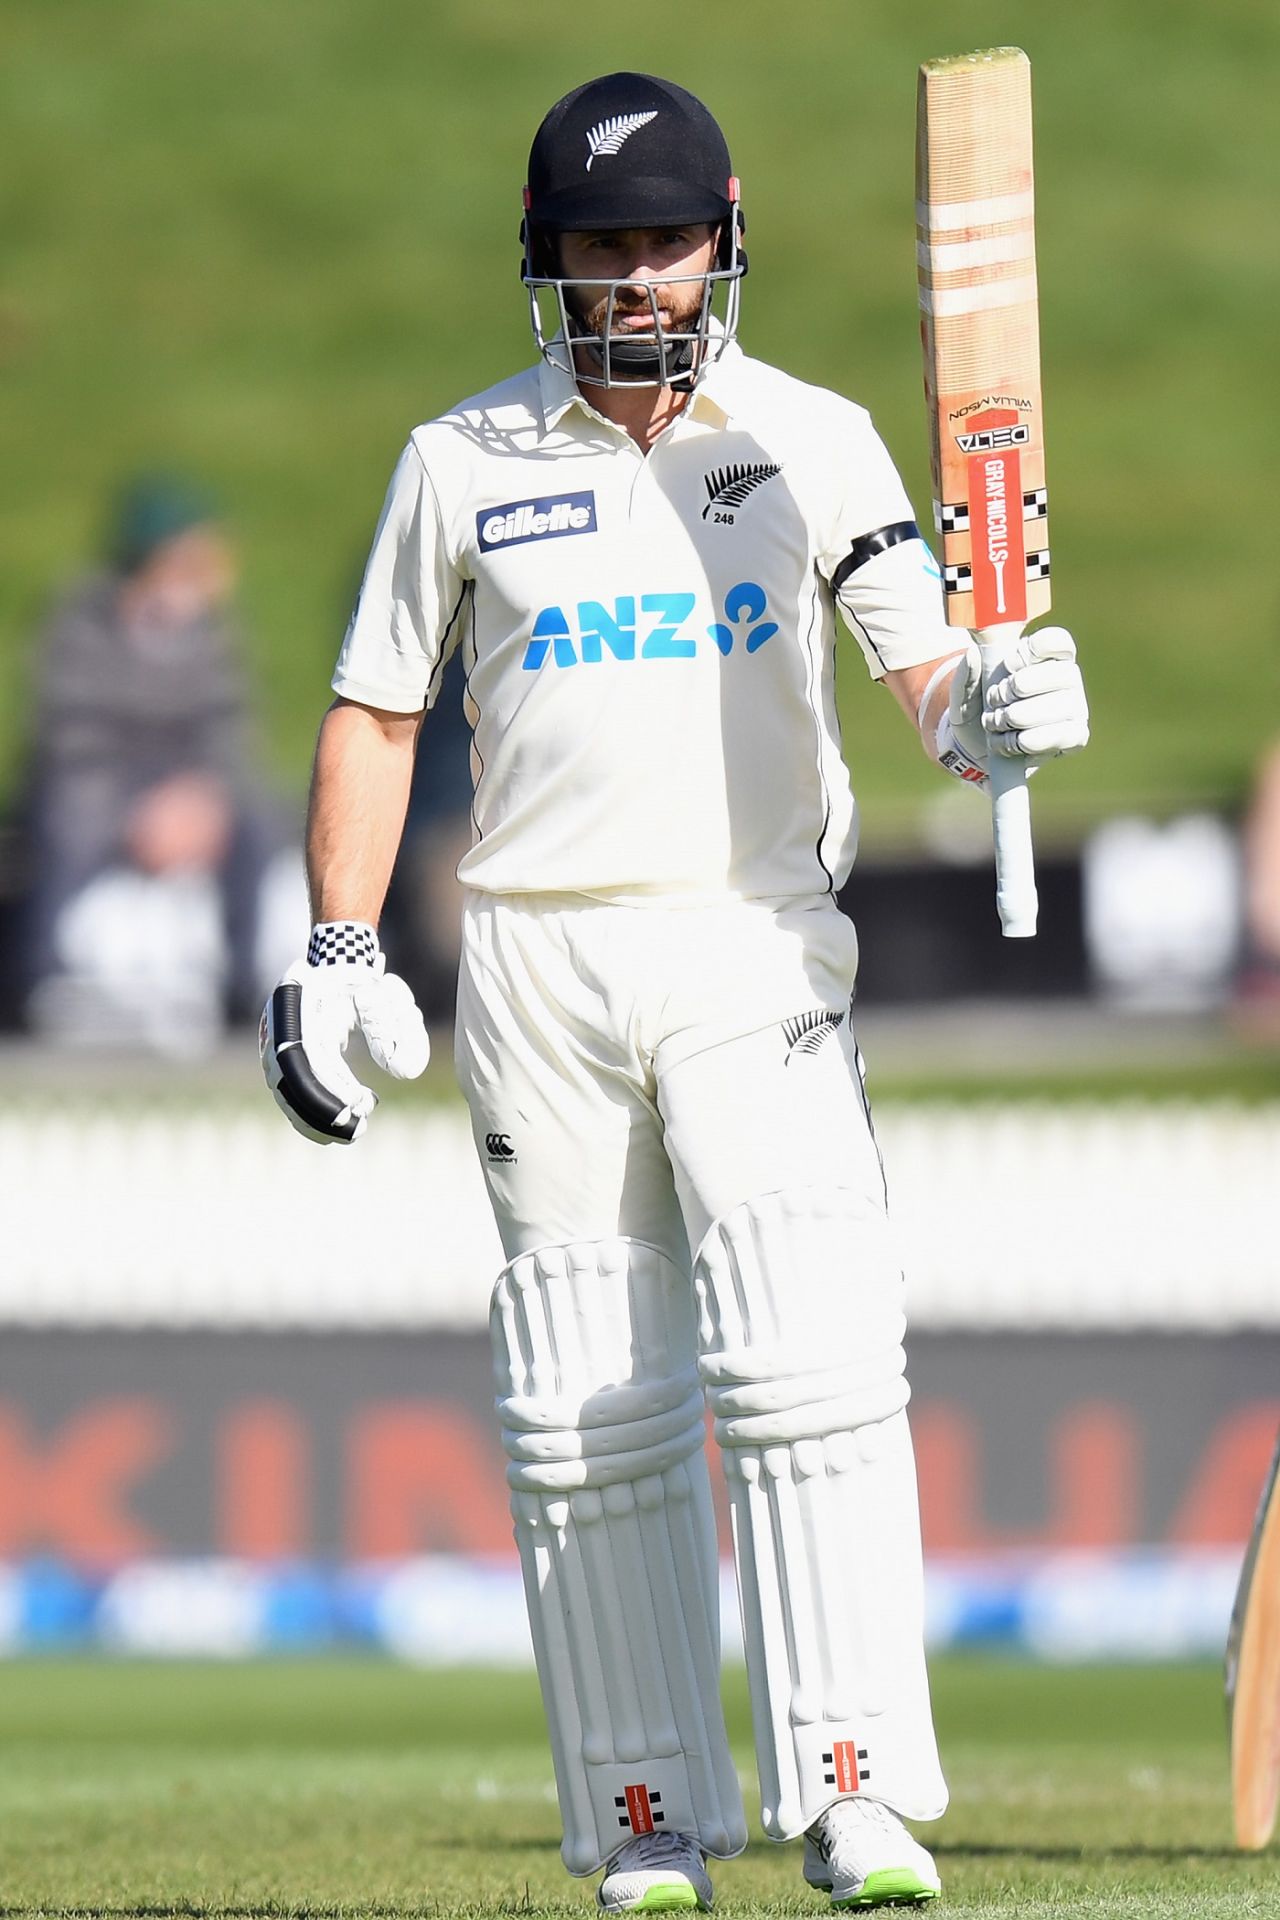 Kane Williamson brings up his fifty, New Zealand vs West Indies, 1st Test, Hamilton, 1st day, December 3, 2020 